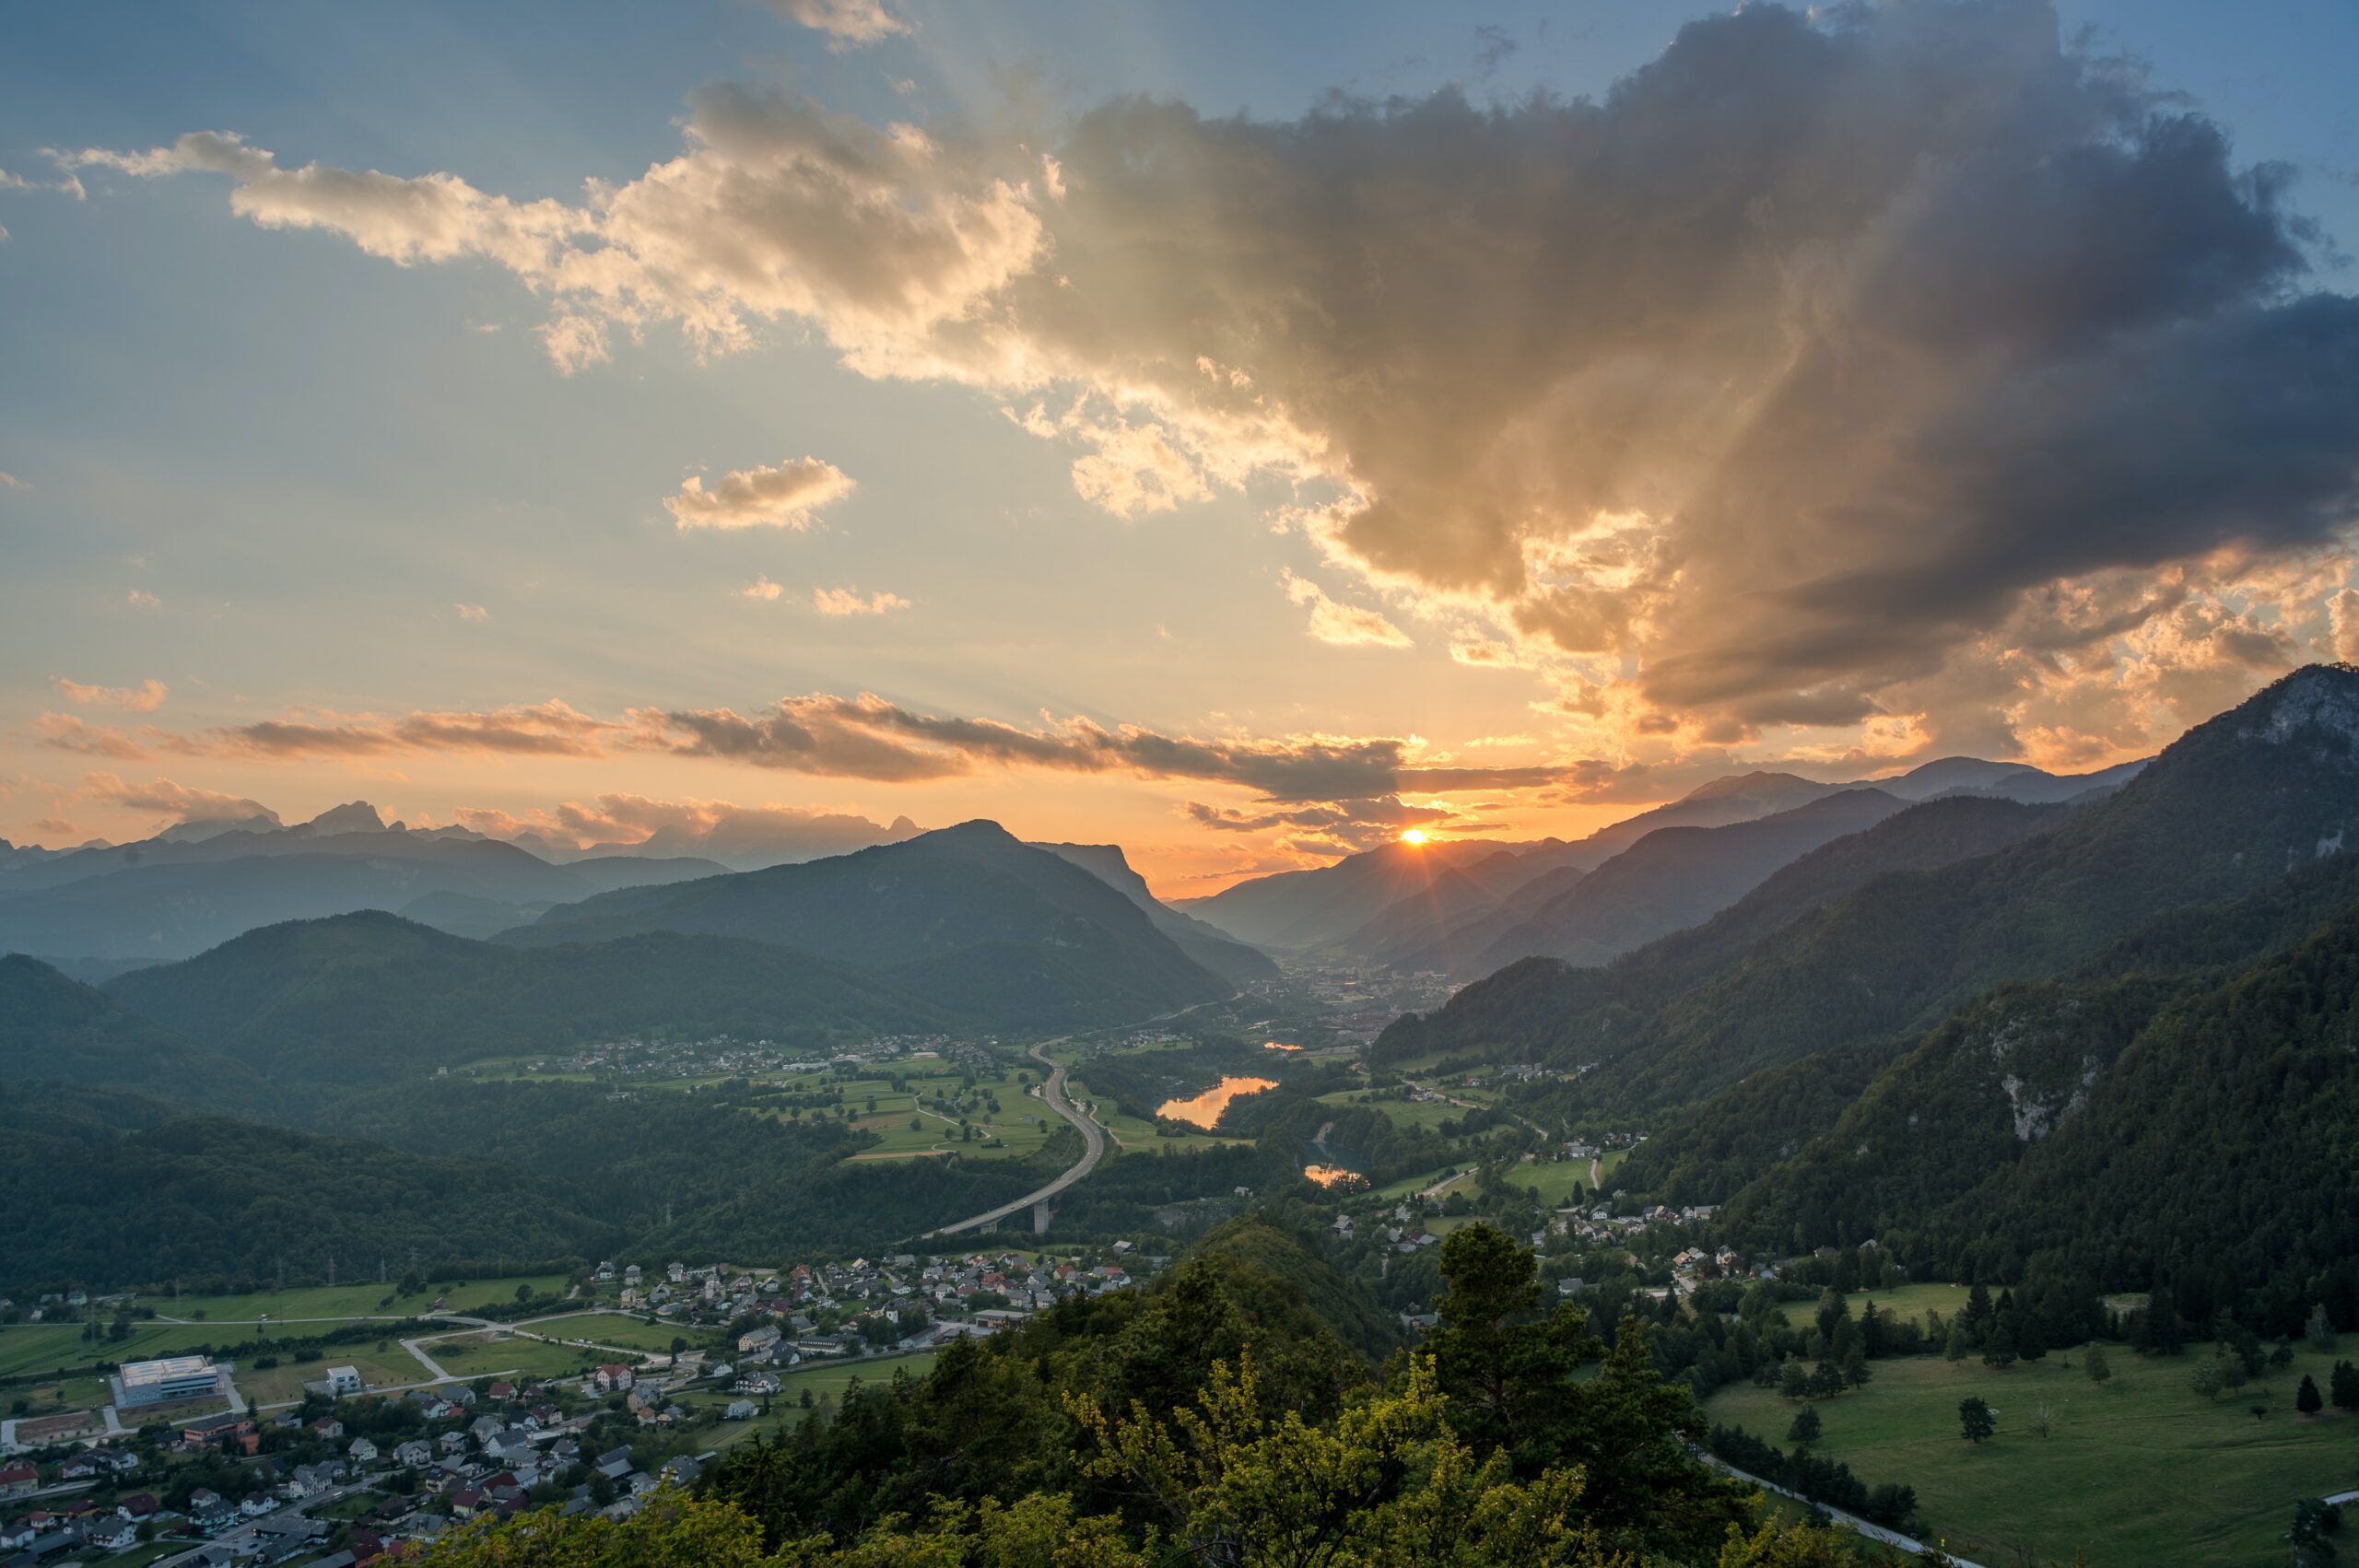 sunrise view looking down on a lush green valley with small lake and town in Slovenia